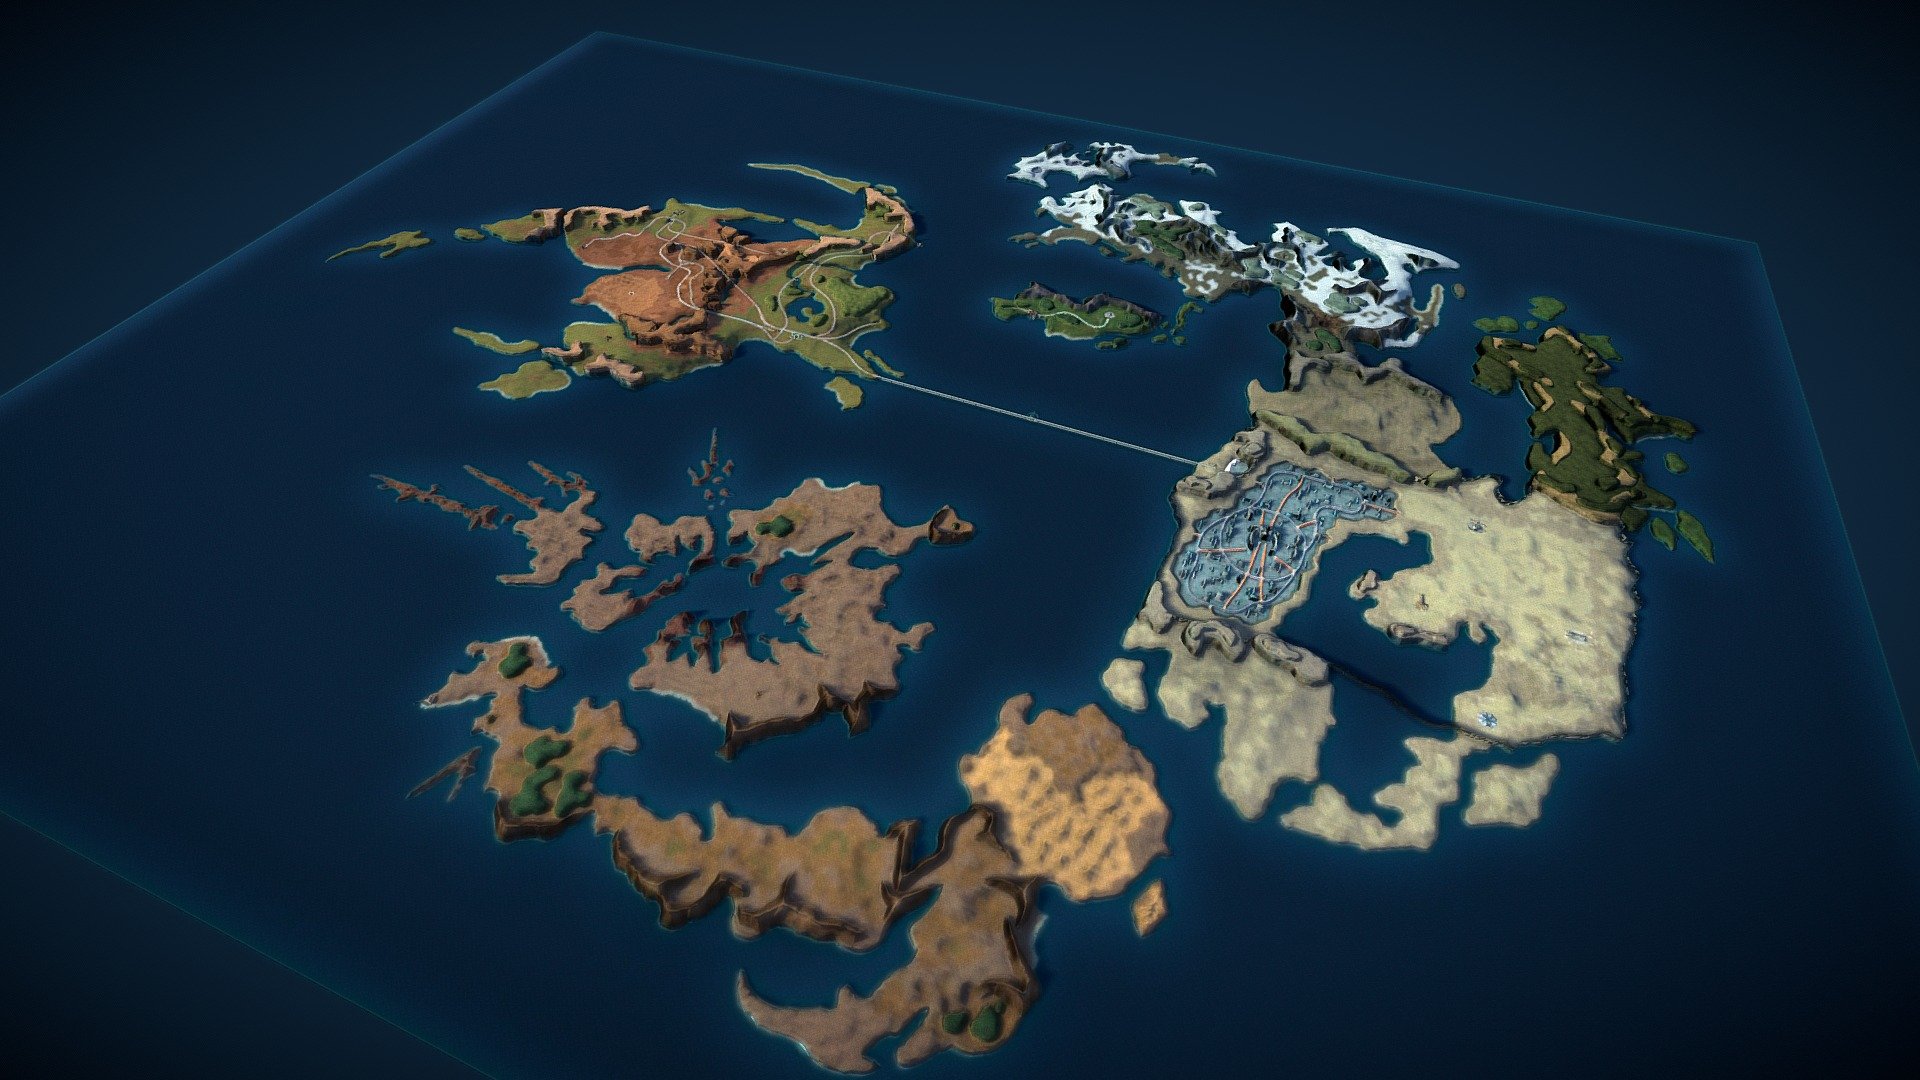 A 3d map of the world from the game Final Fantasy VIII 3d model